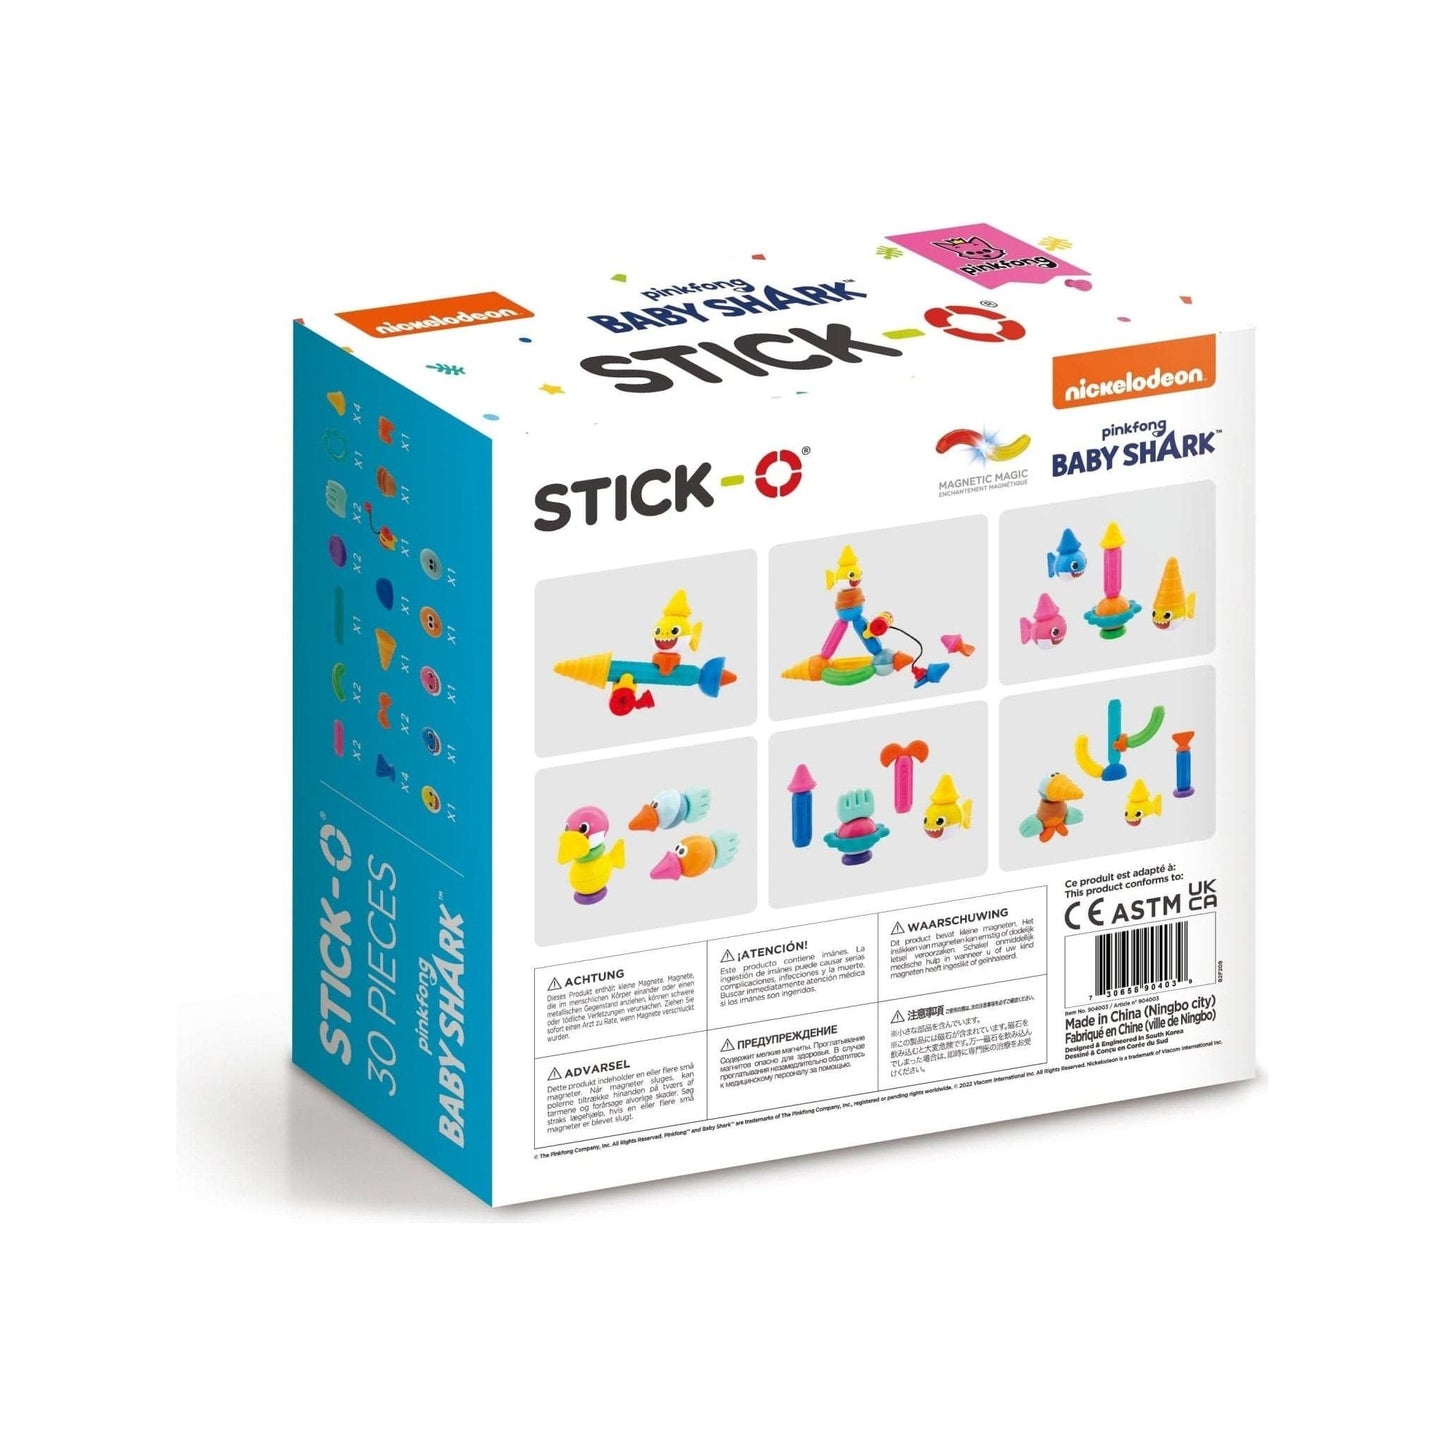 Magformers Stick-O Baby Shark Friends Set back of box